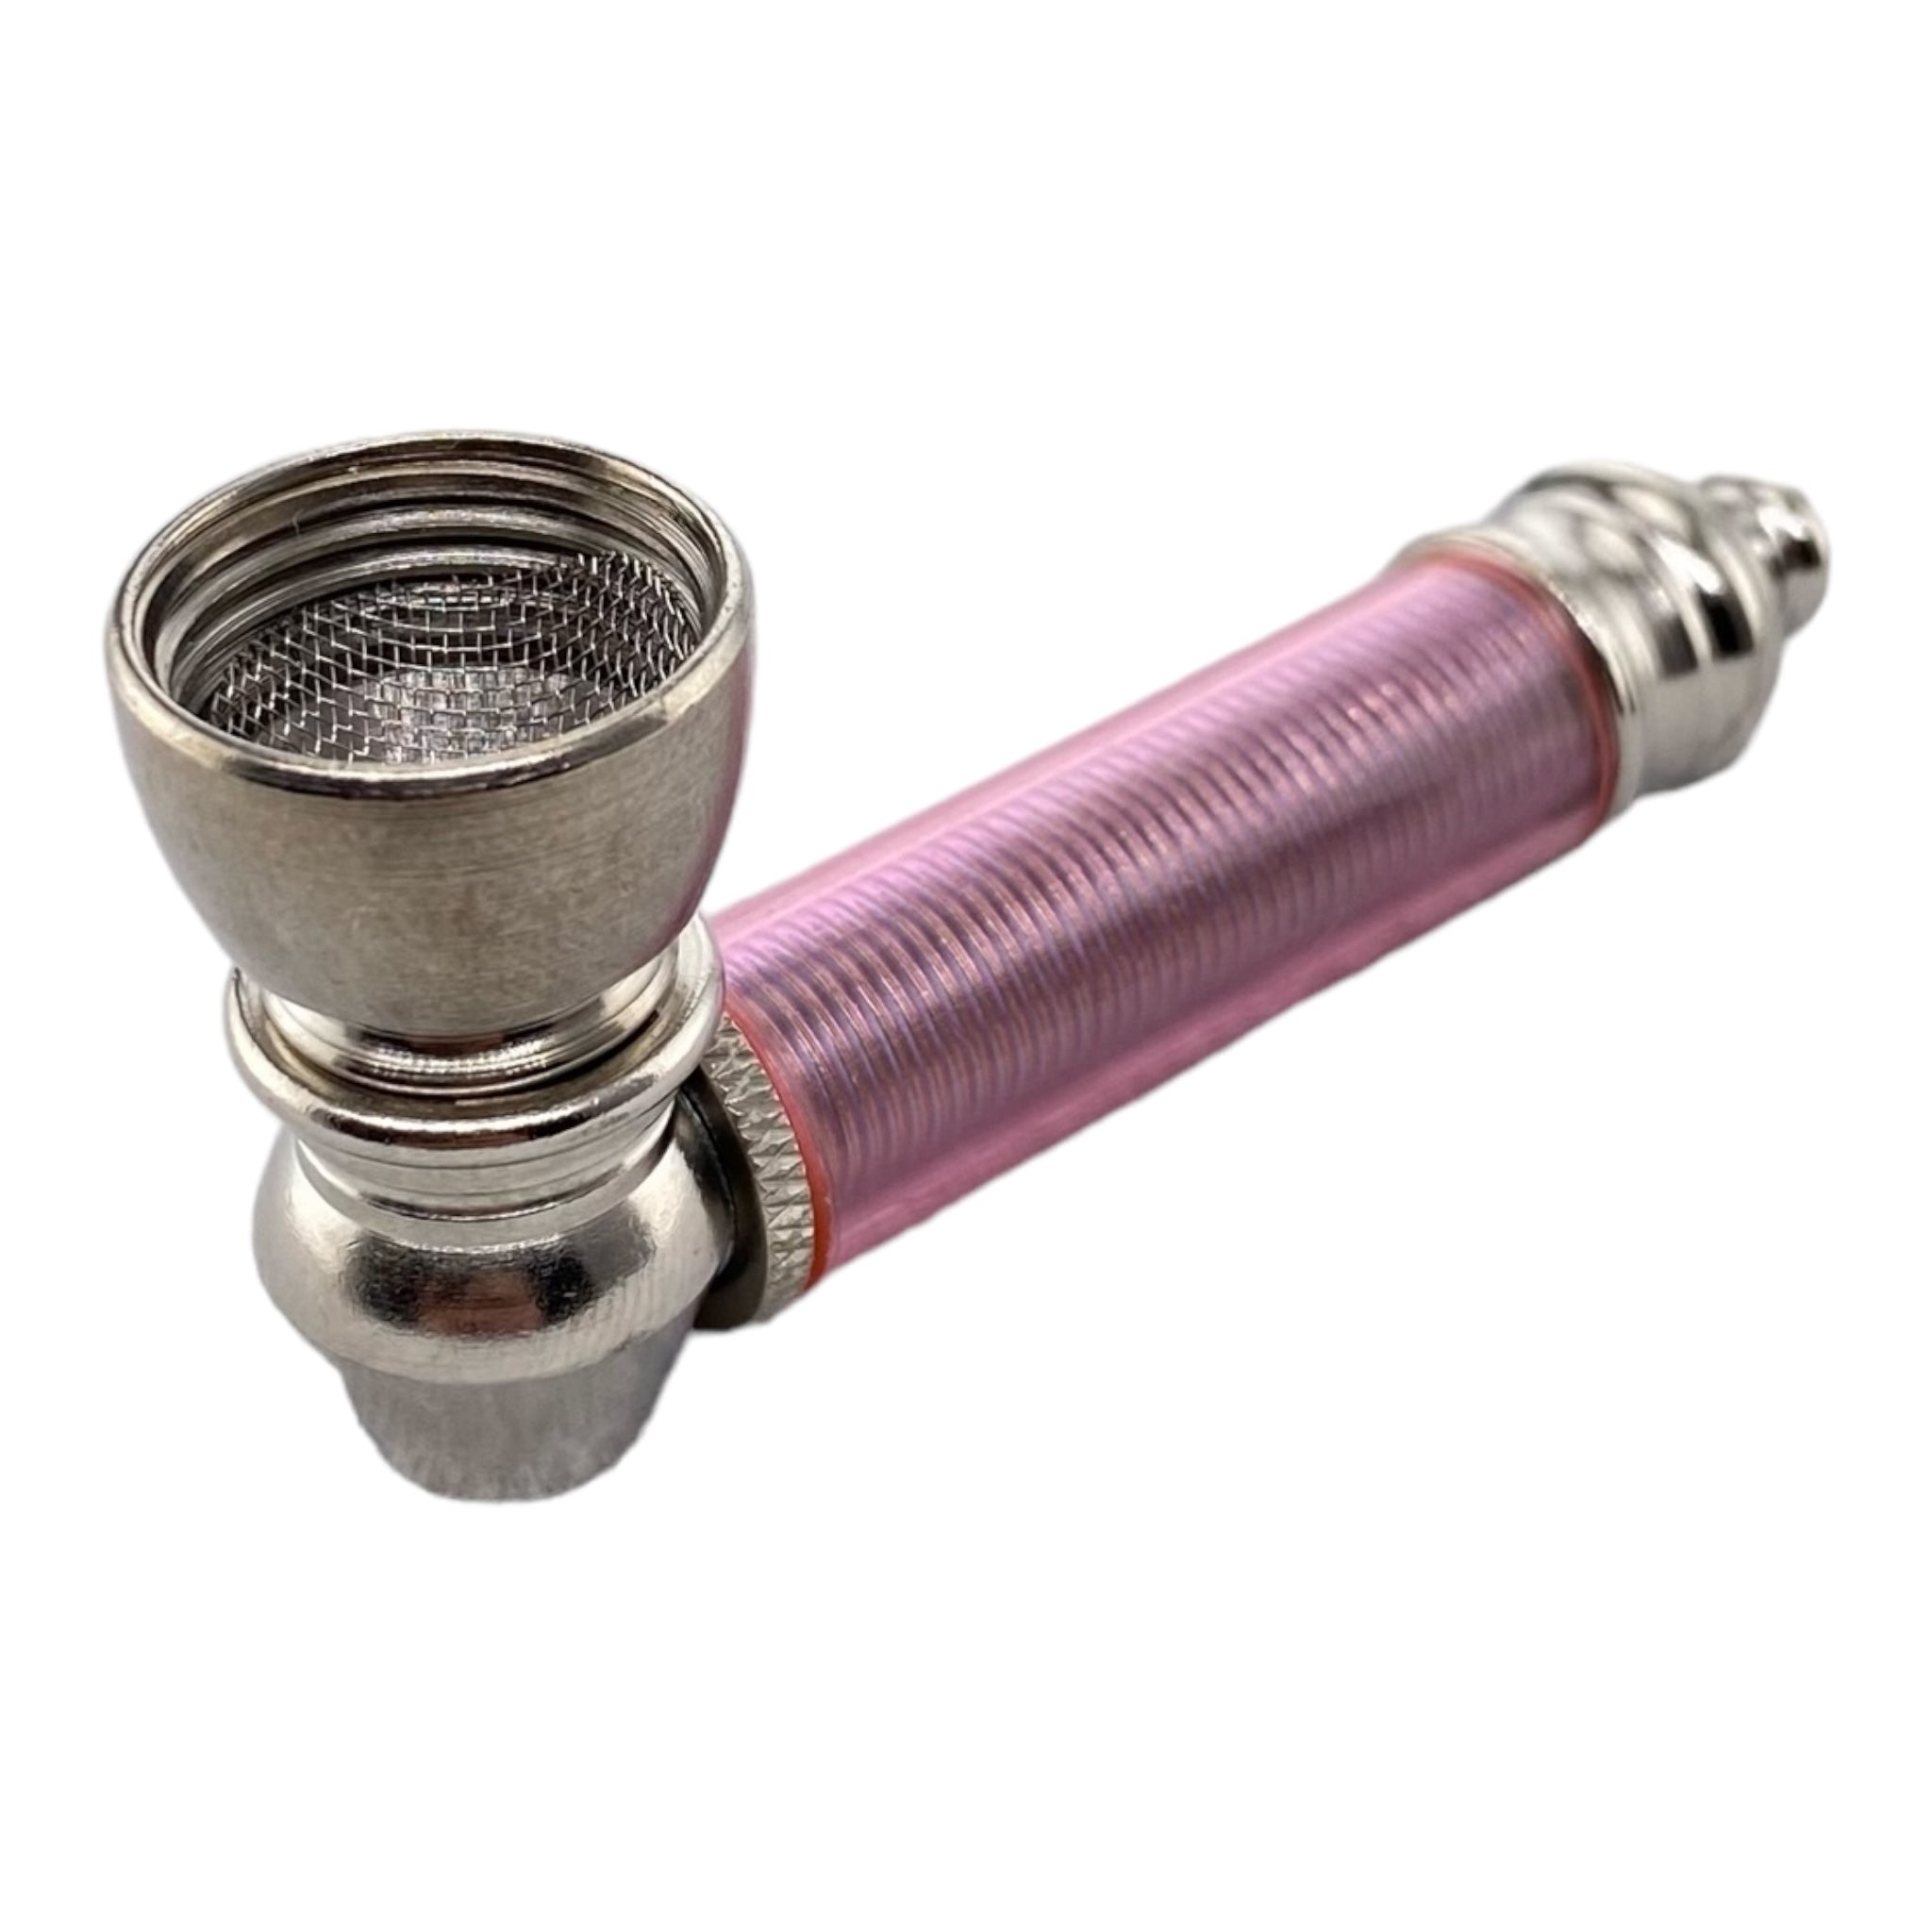 Metal Hand Pipes - Silver Chrome Hand Pipe With Pink Plastic Stem